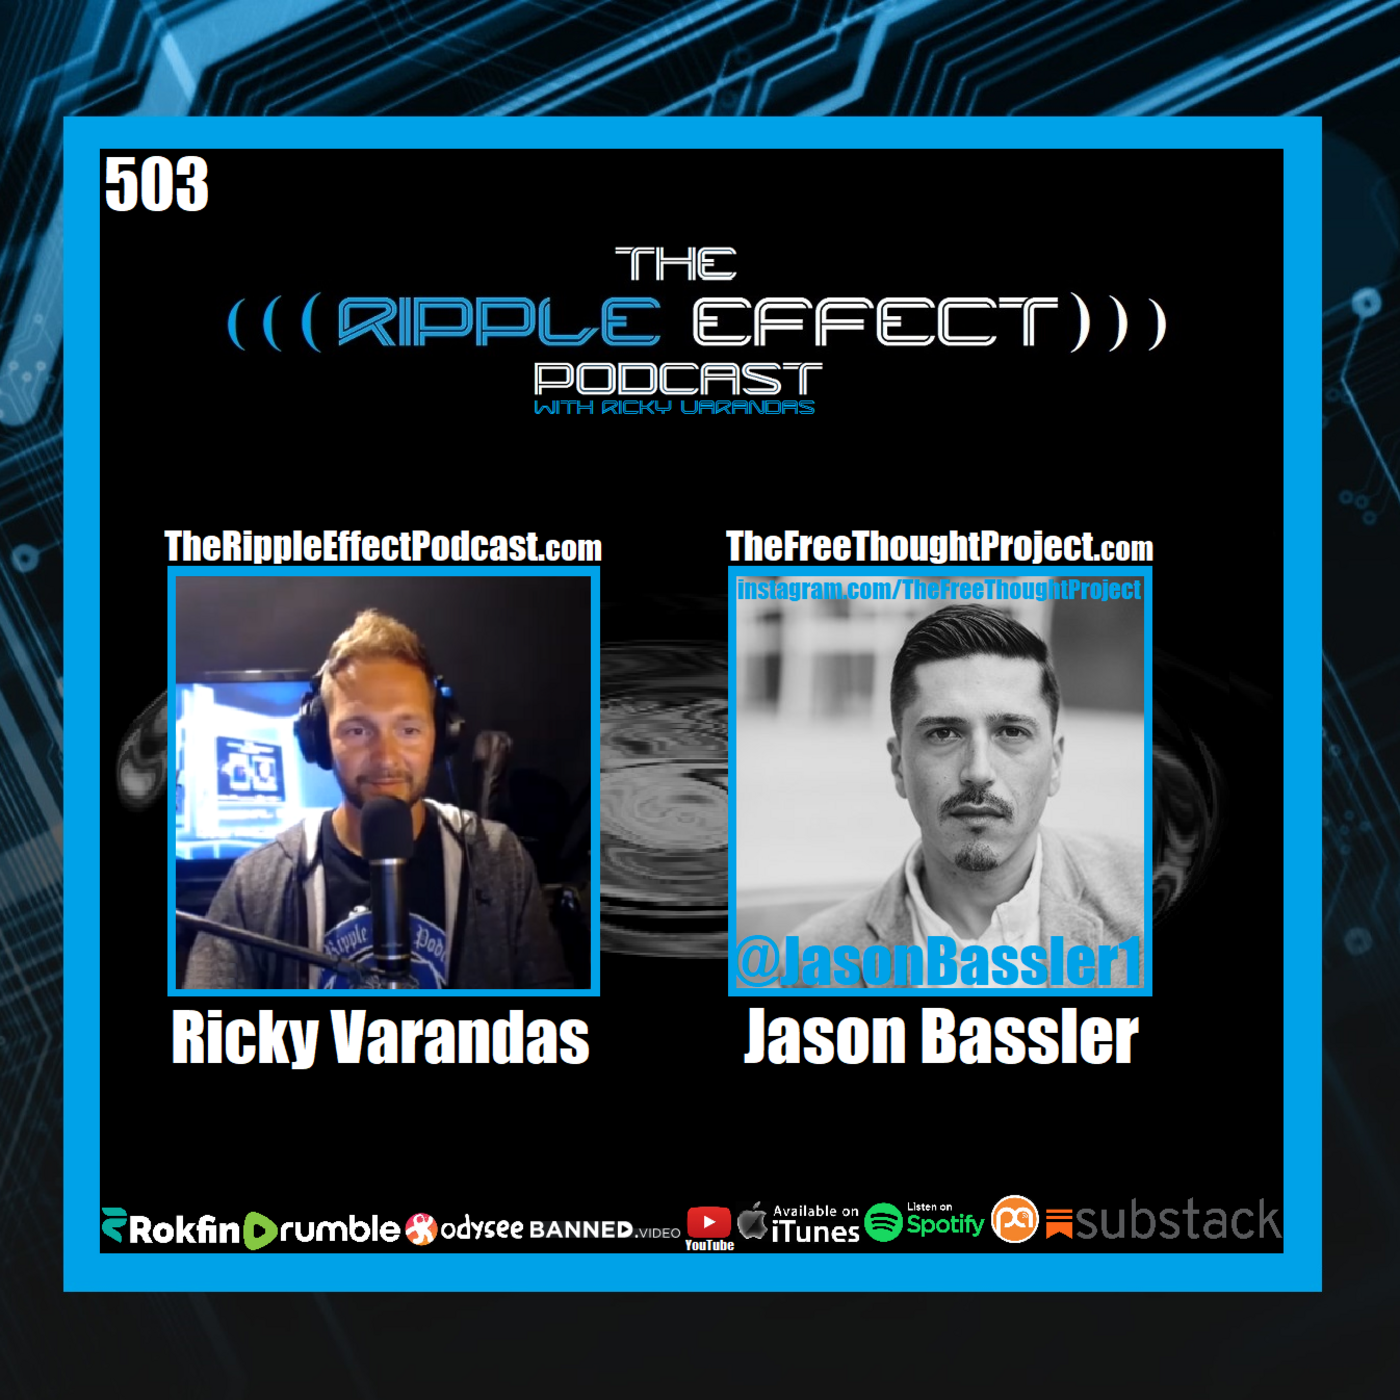 Episode 503: The Ripple Effect Podcast (Jason Bassler | Exploring Free Thought)